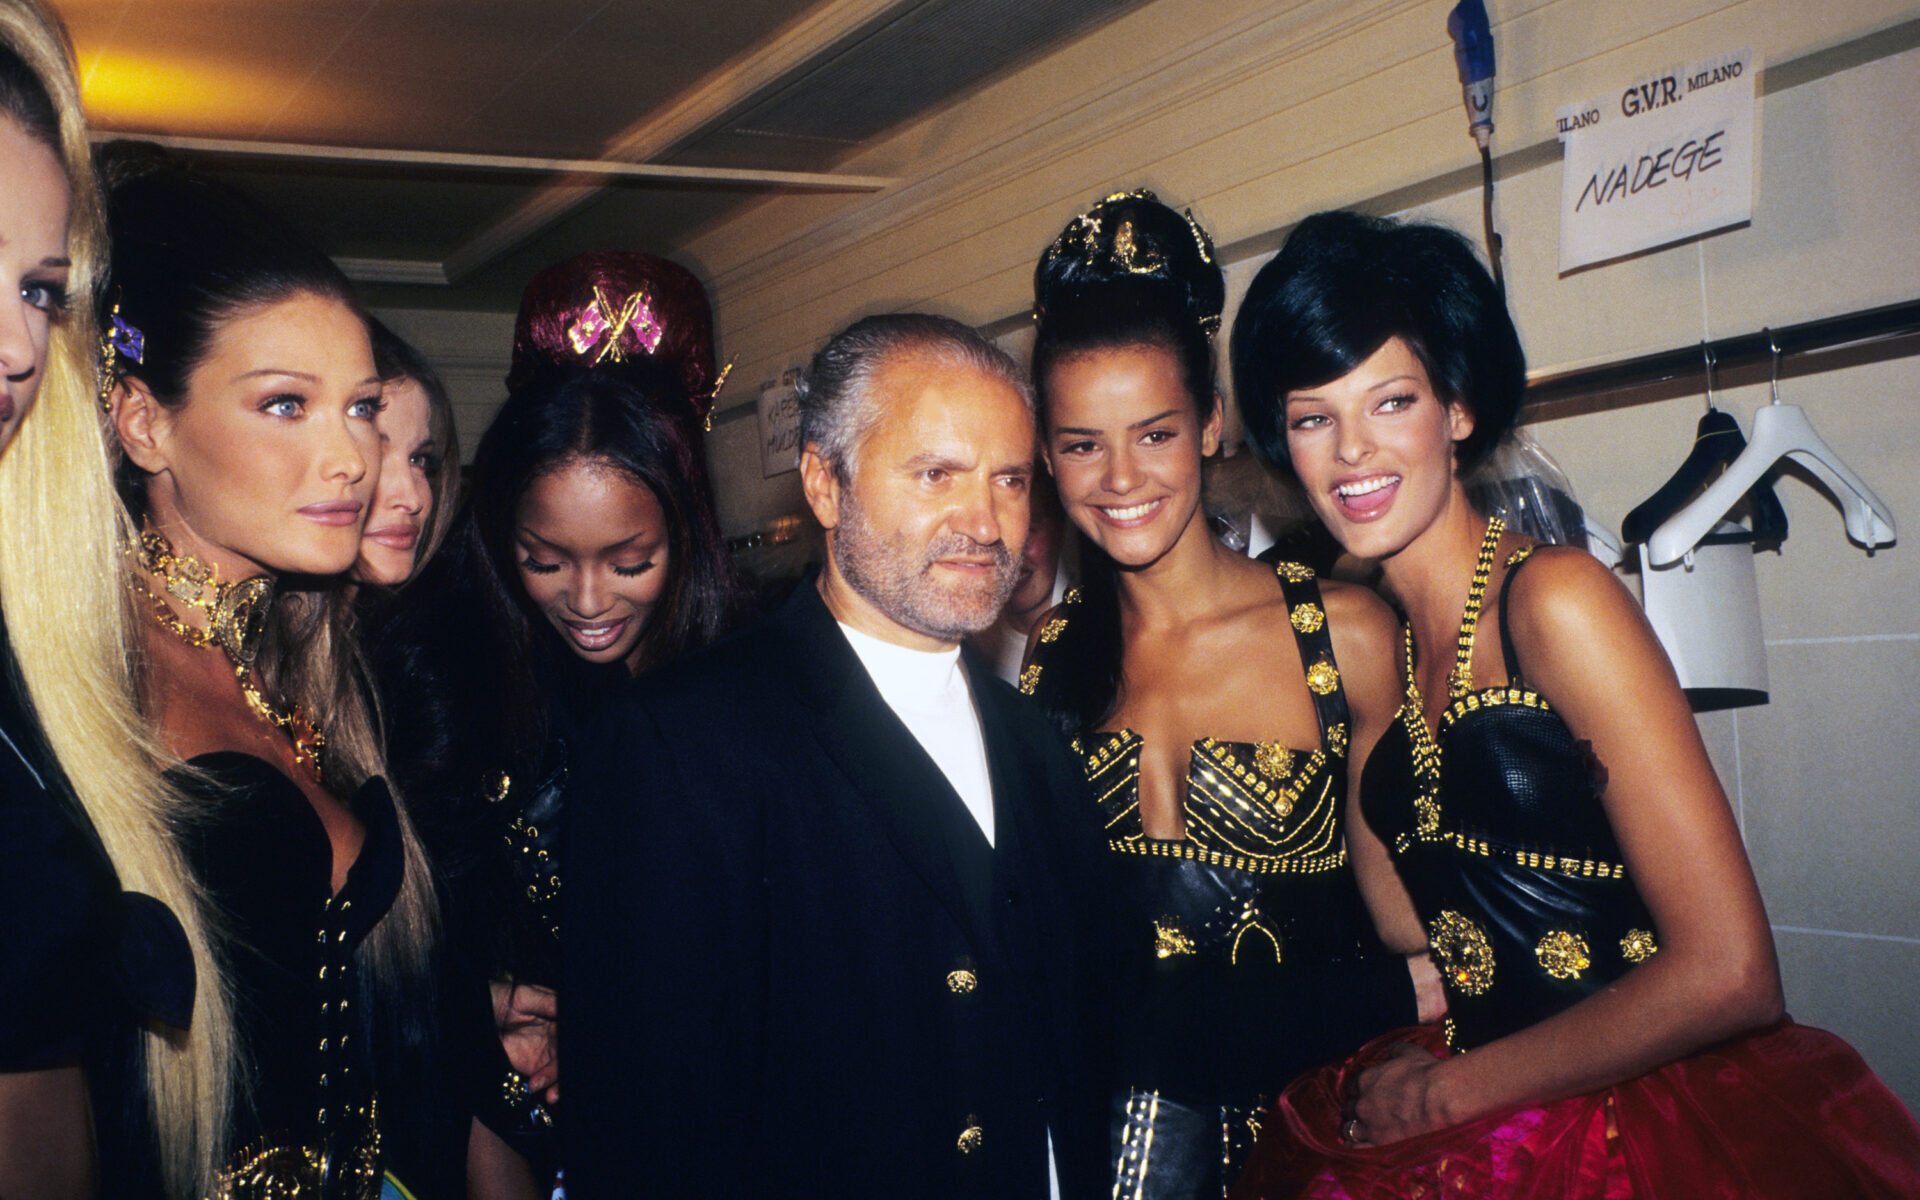 PARIS, FRANCE - JULY 01 : Carla Bruni, Naomi Campbell, Gianni Versace, Nadege and Linda Evangelista attend the Versace High Fashion Show at the Ritz Hotel on July 1,1992 in Paris, France. ( Photo by Foc Kan/Wireimage )